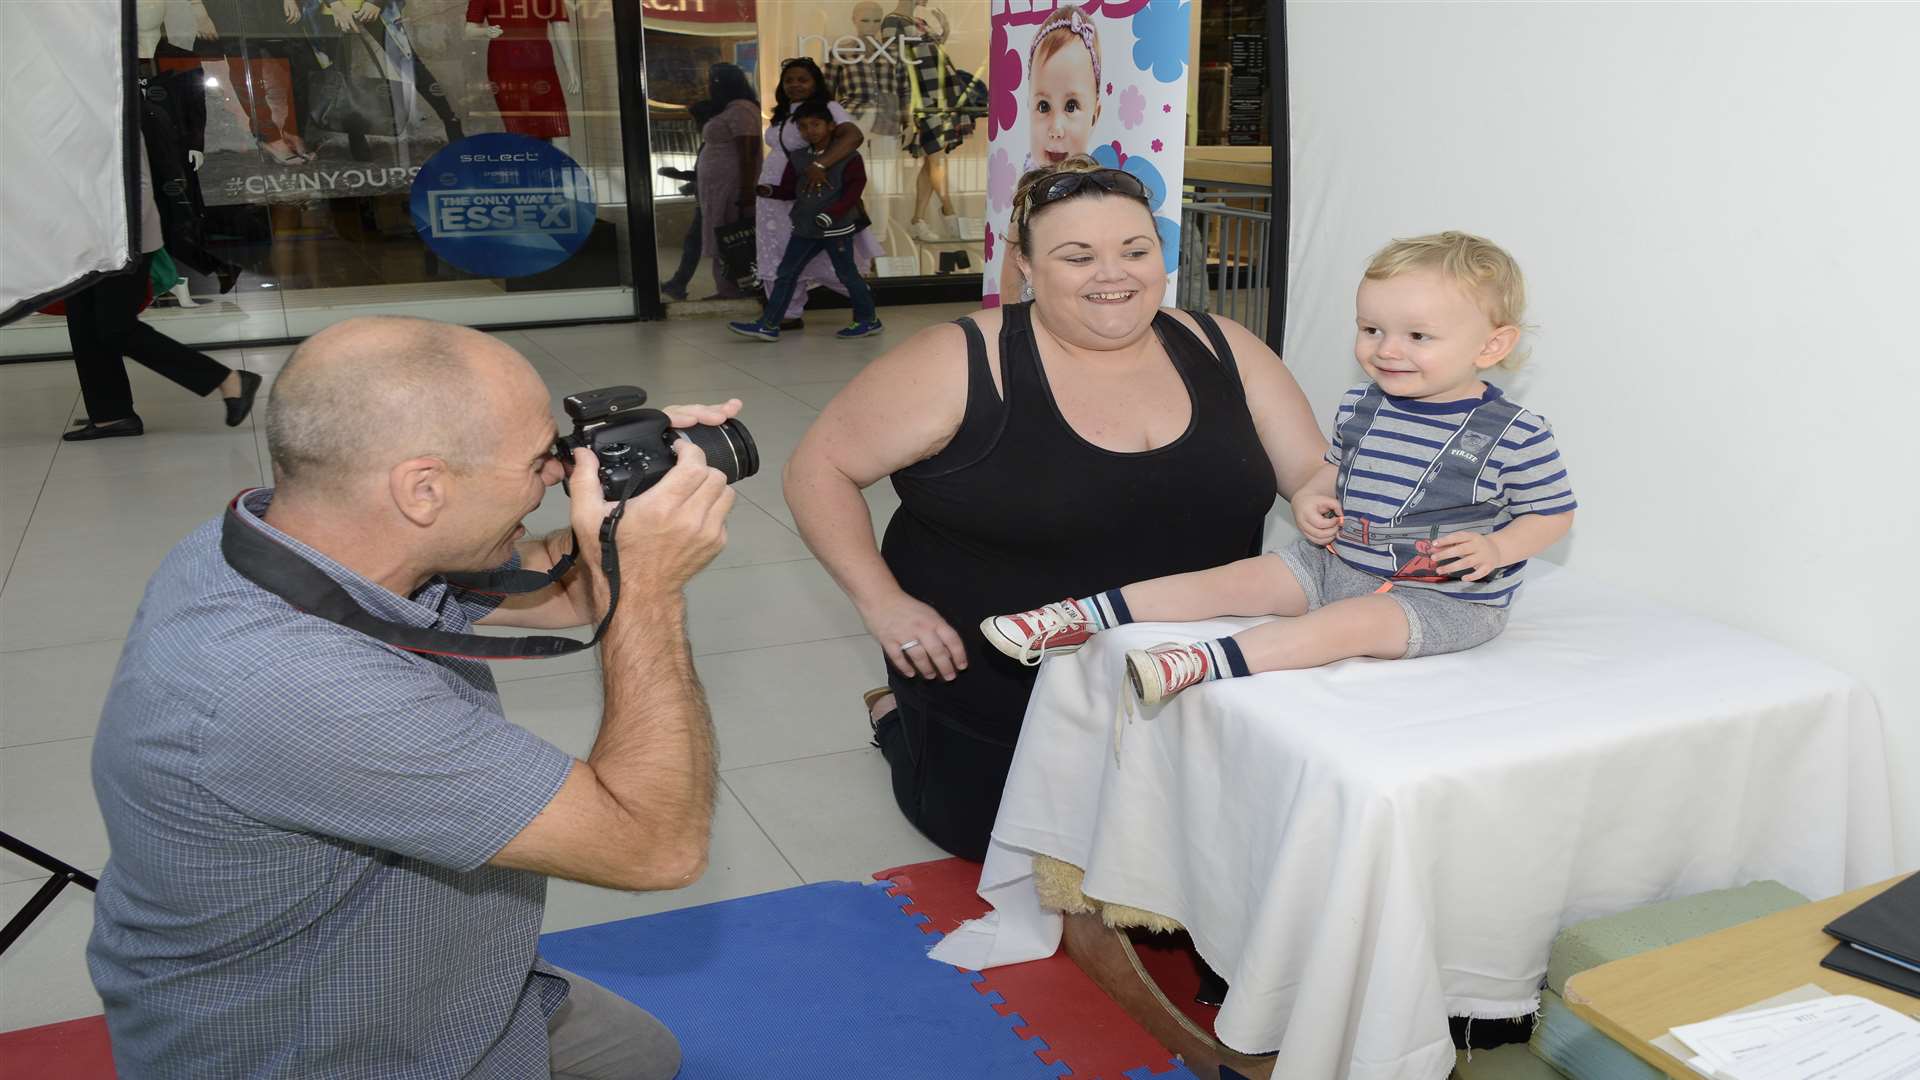 Cute Kids Photographer Andy Nield photographs Leyton Homden- Cable, 2, as mum Dee Cable watches